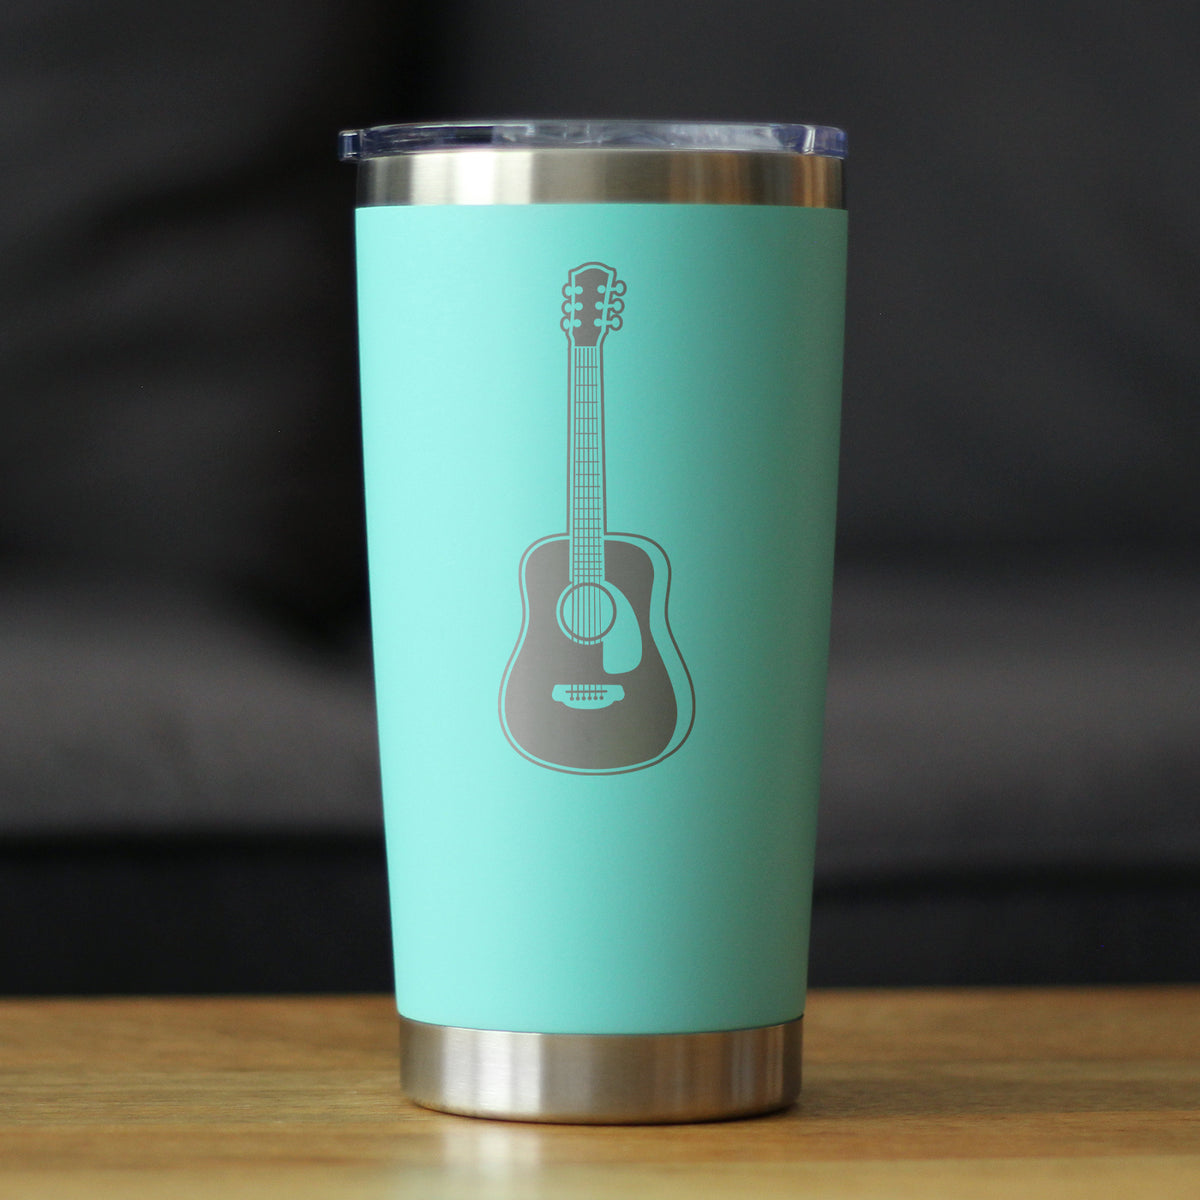 Acoustic Guitar - Insulated Coffee Tumbler Cup with Sliding Lid - Stainless Steel Travel Mug - Guitarist Gifts for Women and Men Musicians